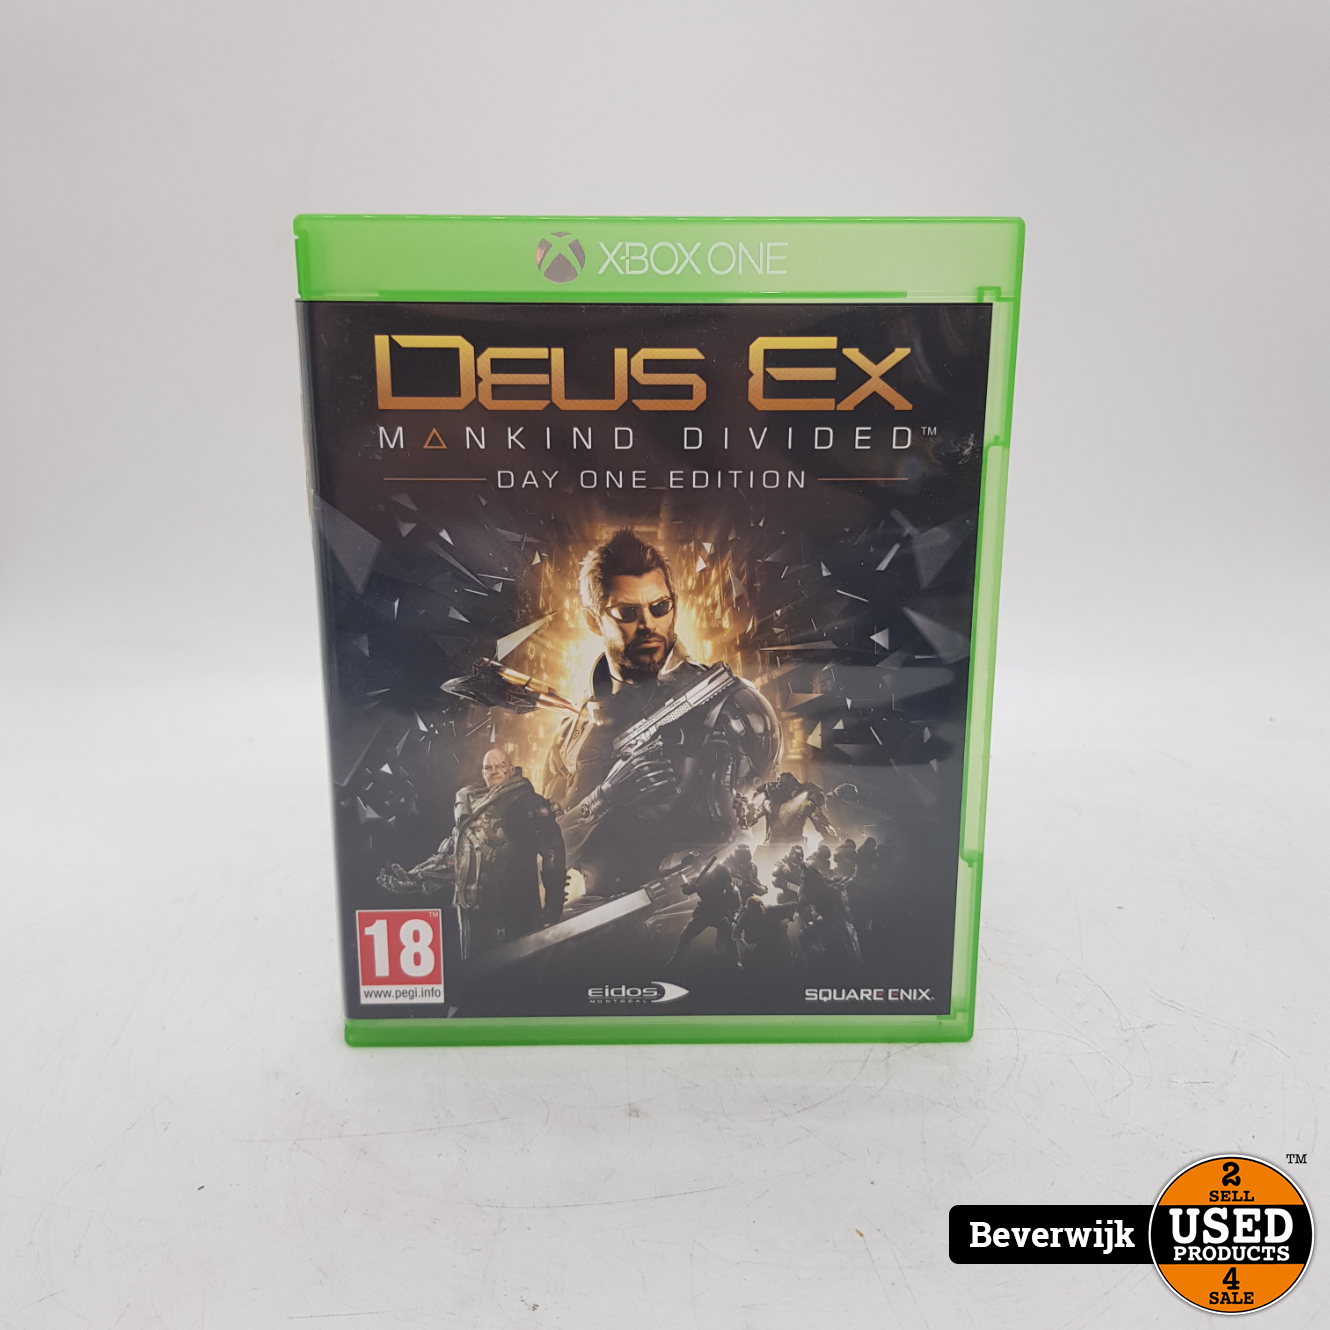 Deus Mankind Divided - Xbox One - Used Products Beverwijk